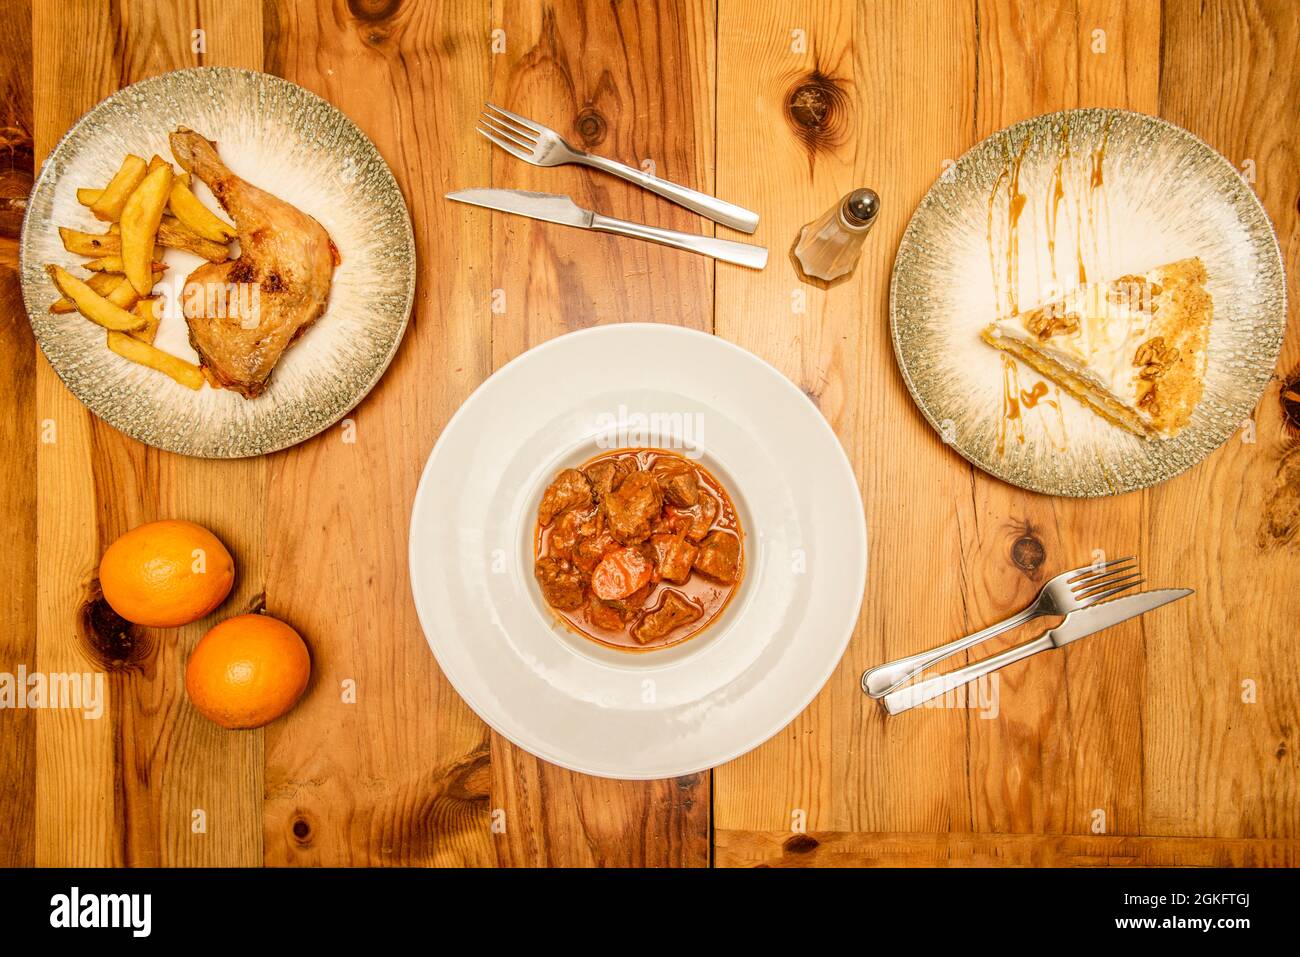 Menu for one with meat stew, roast chicken thigh with deluxe potatoes, cream pie with walnuts. Knives and forks on a pine wood table Stock Photo